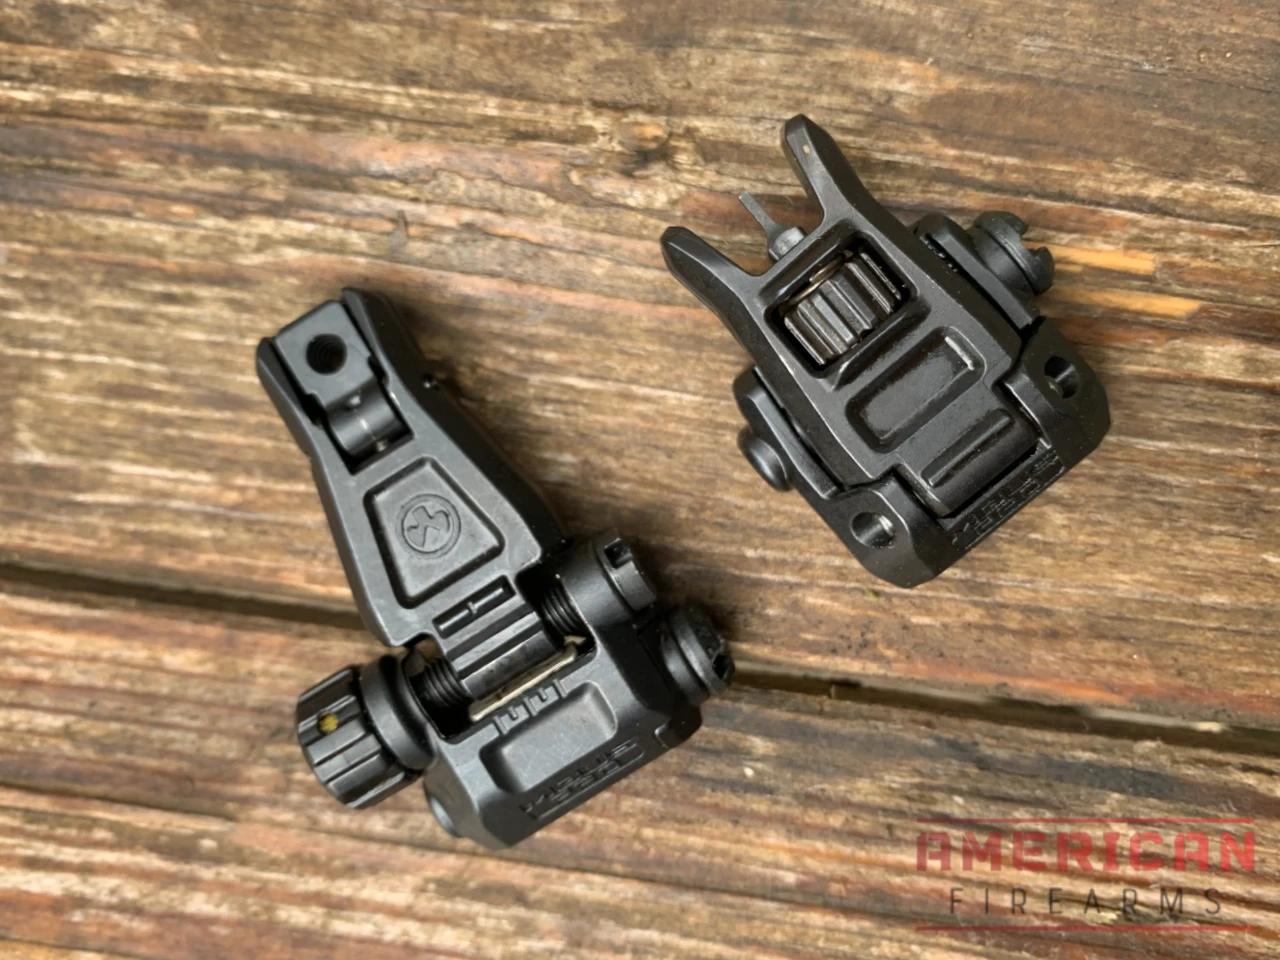 The MBUS Pros are all steel, which adds strength and allowed Magpul to make them really, really small. 